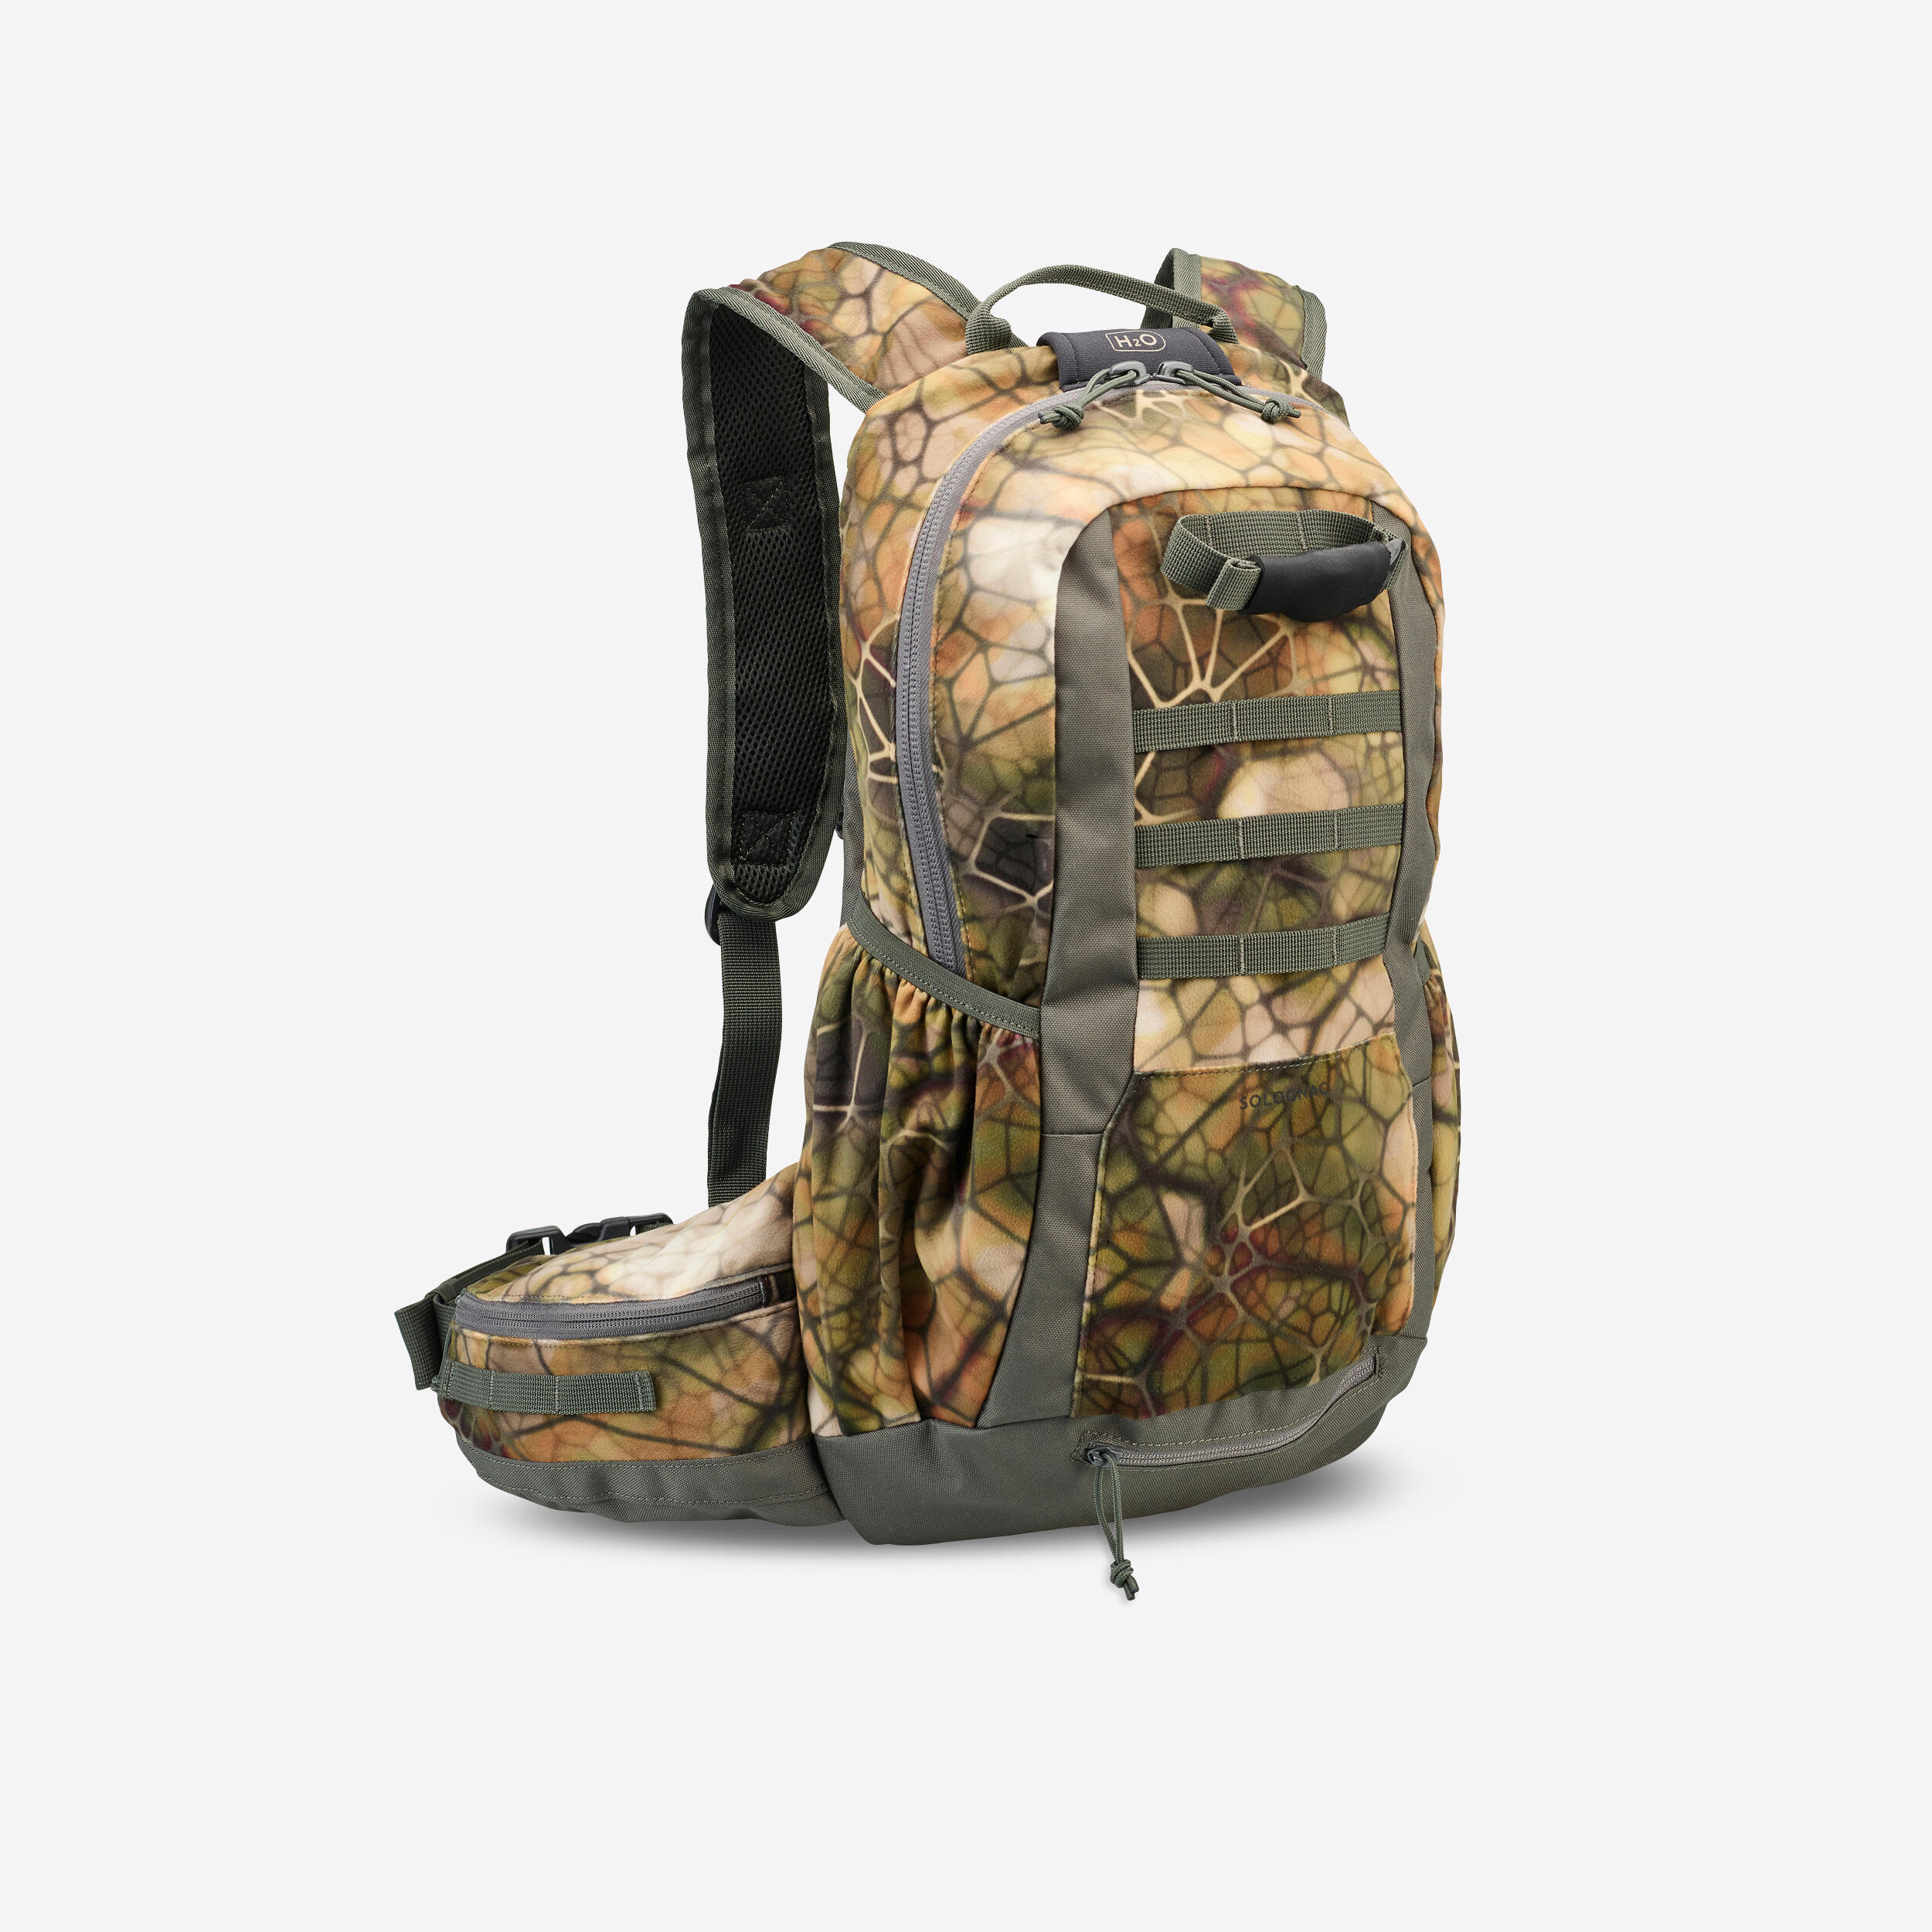 Silent Country Sport Backpack 20L Xtralight Camo Furtiv 1/8